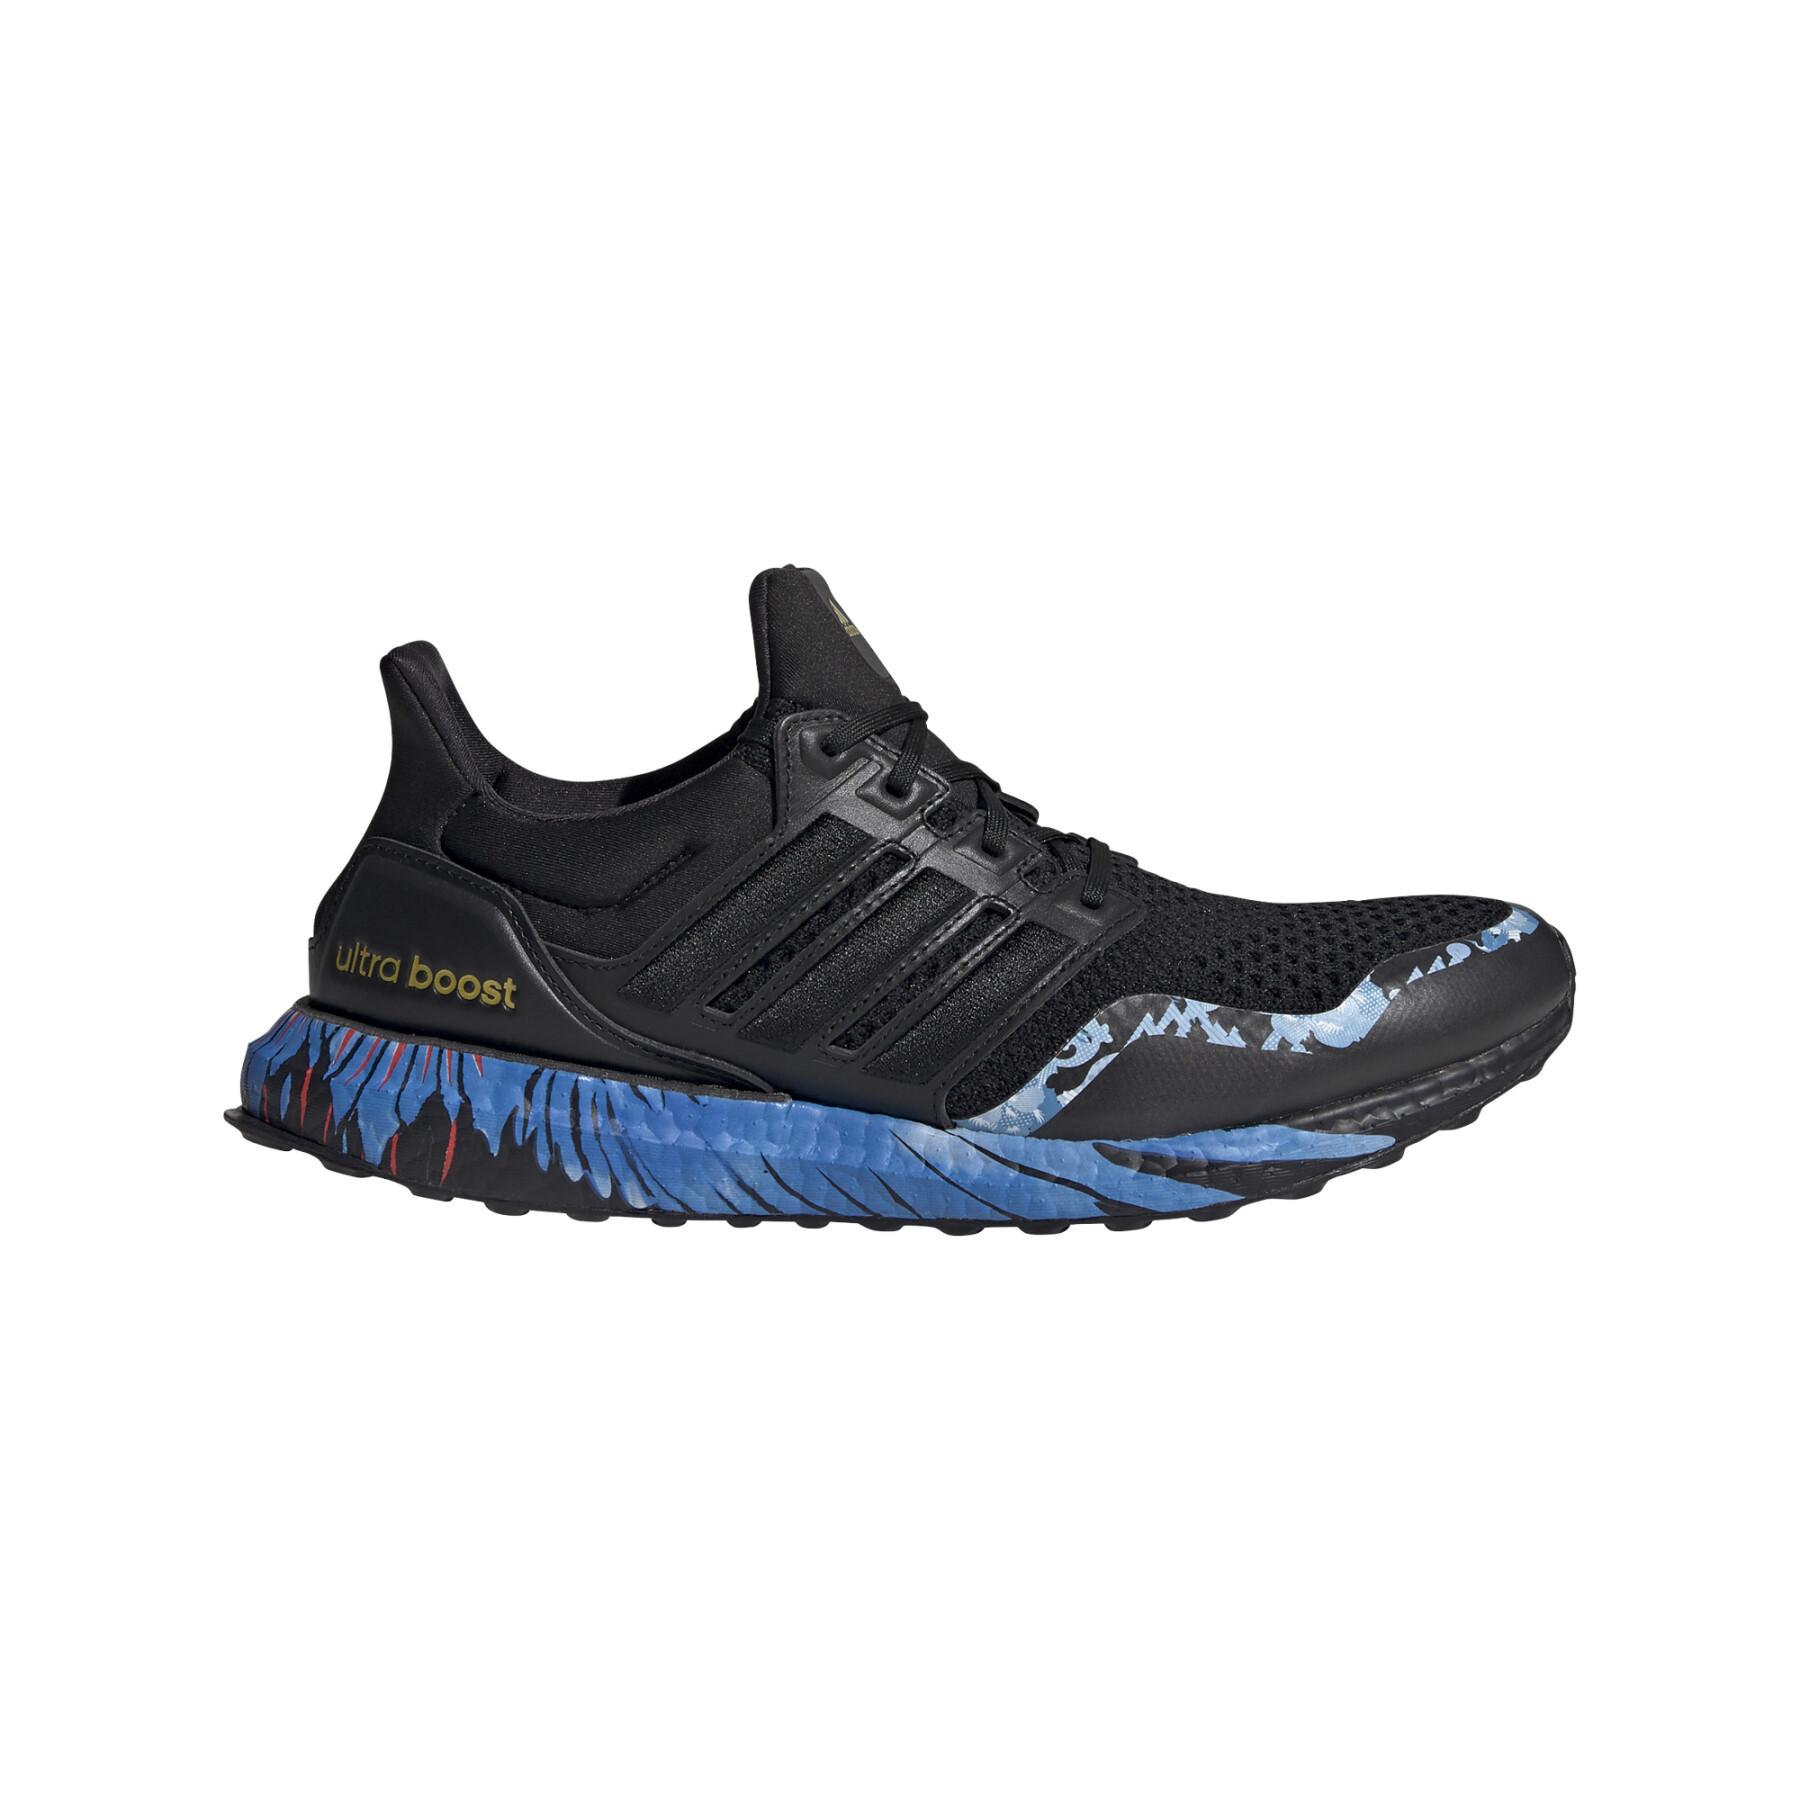 Trainers adidas Ultraboost DNA